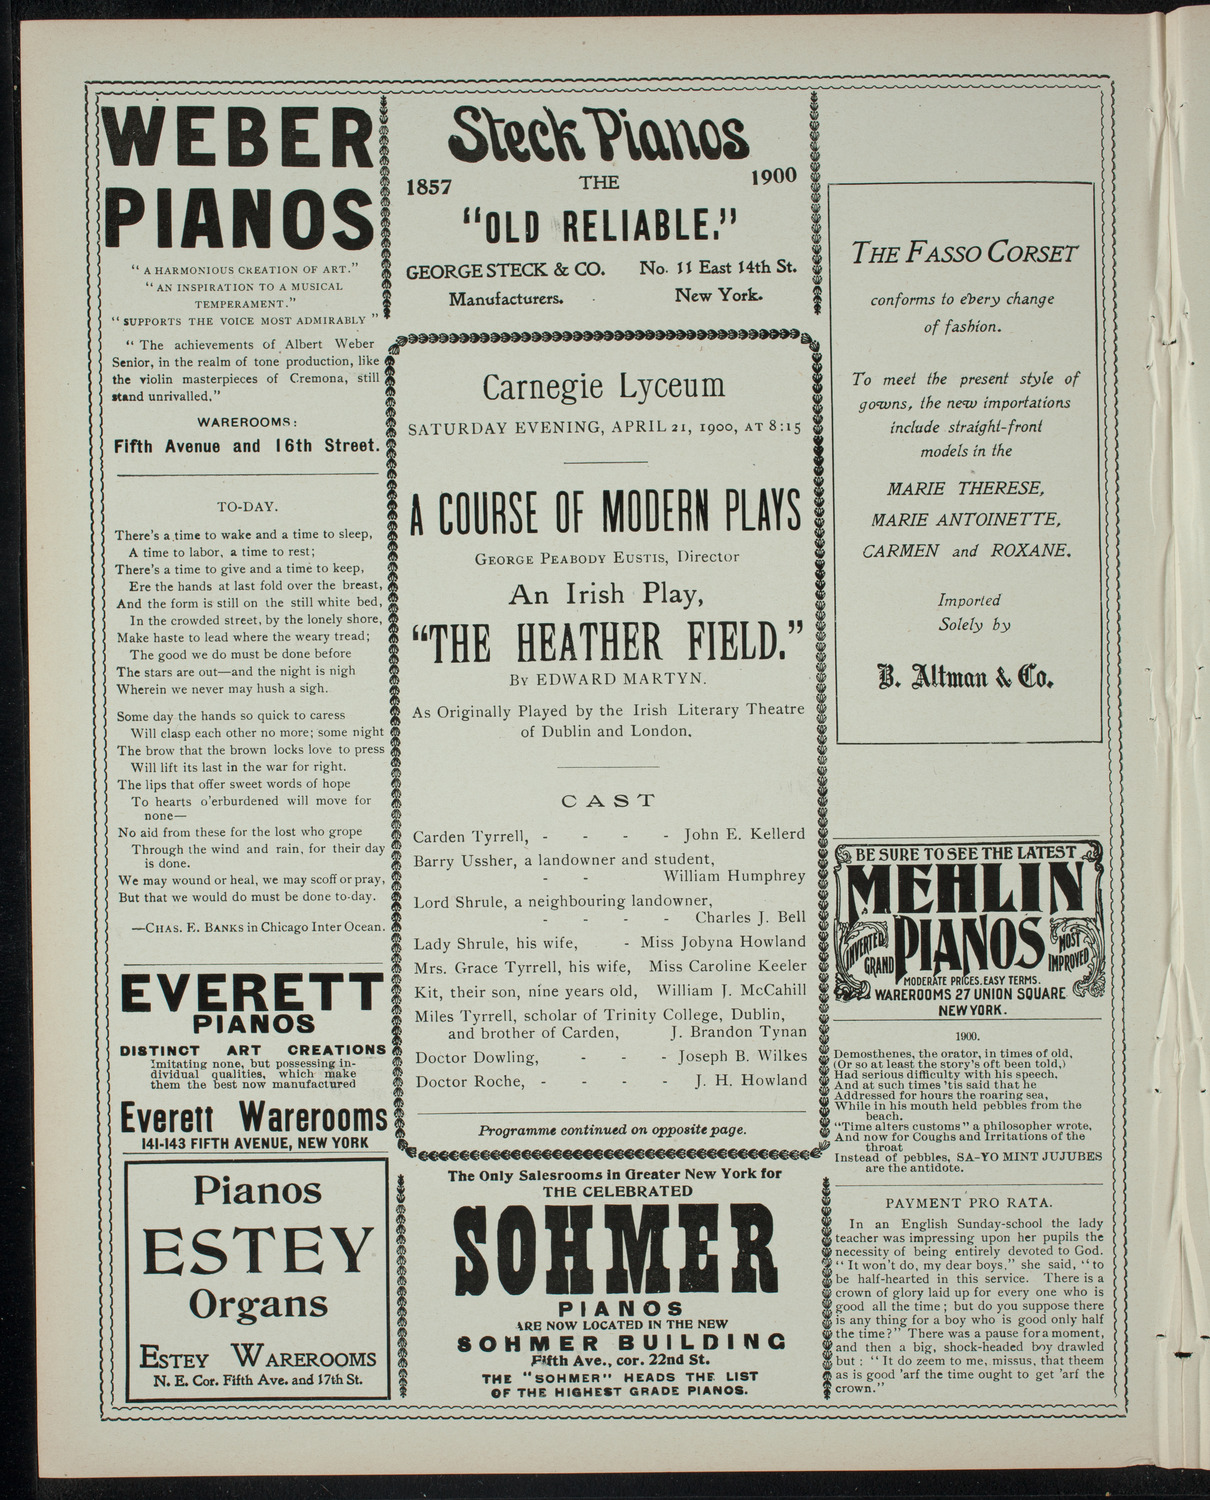 George Peabody Eustis: A Course of Modern Plays, April 21, 1900, program page 2